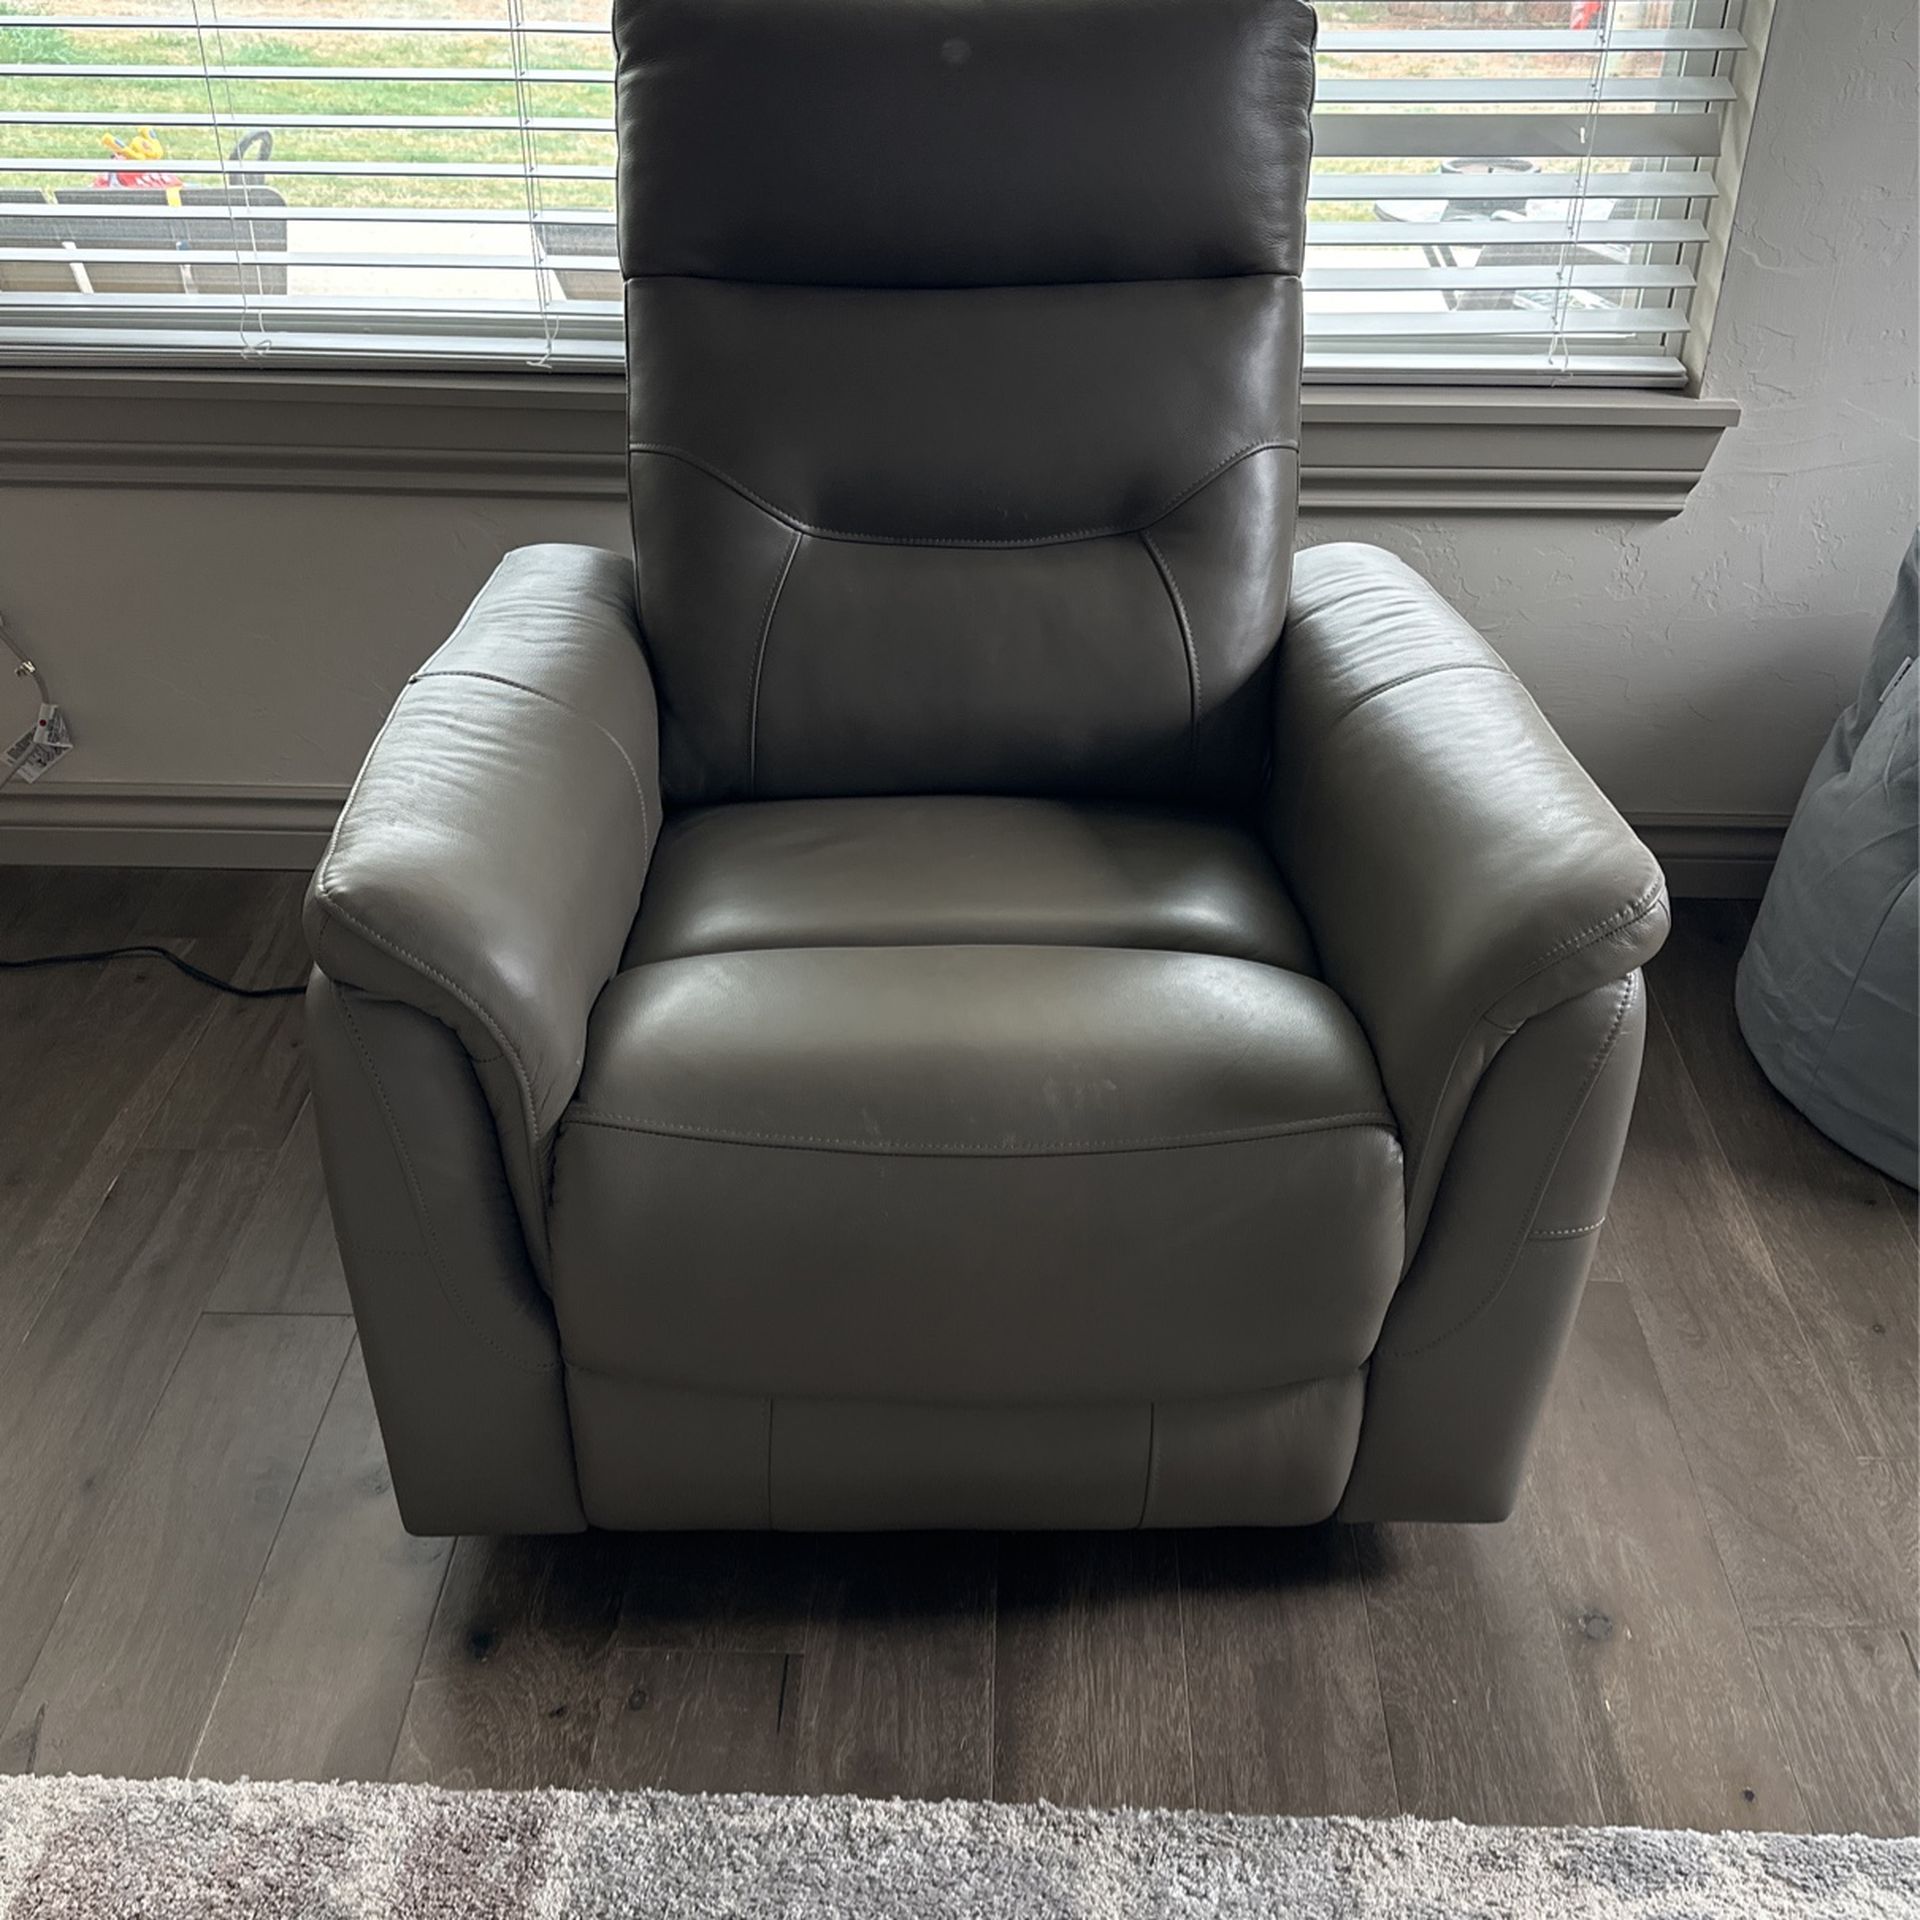 Charcoal Gray Very Nice Recliner W/ USB Port